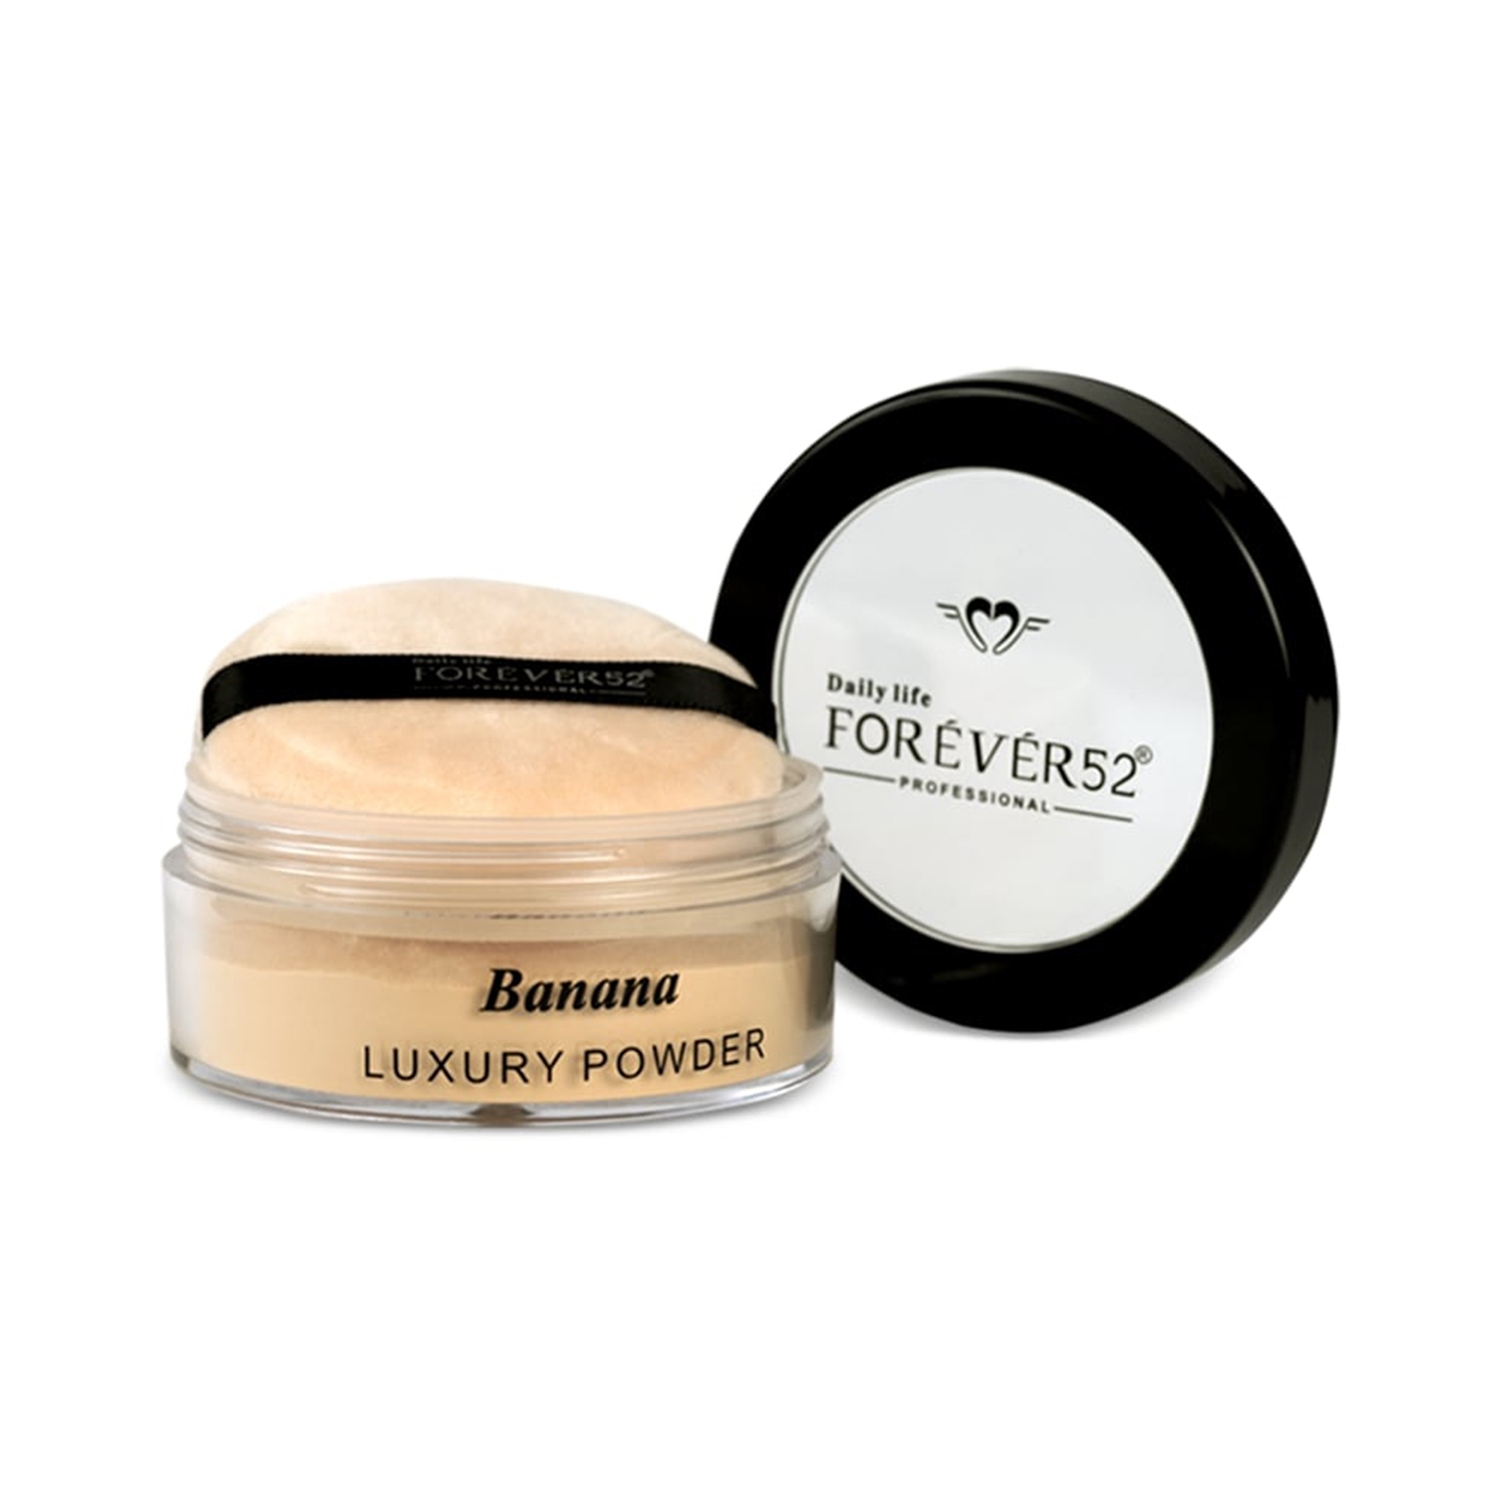 Daily Life Forever52 | Daily Life Forever52 Banana Luxury Powder FBP001 (20gm)